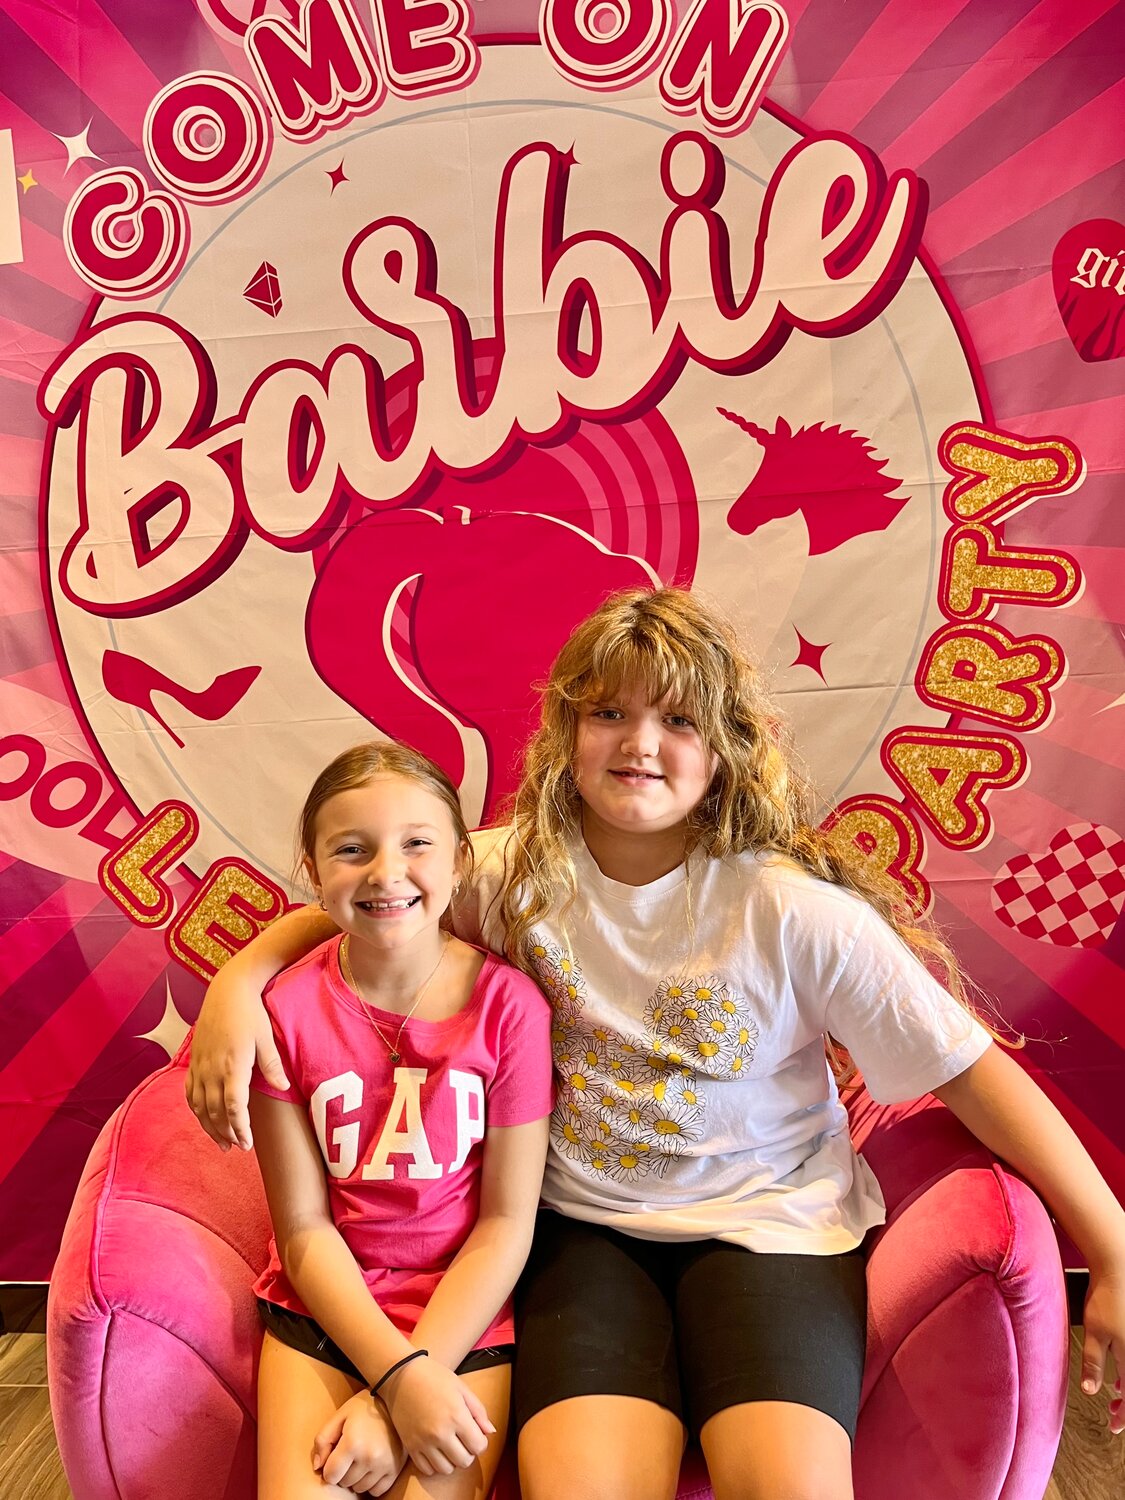 While it's not a children's movie per se, eight-year-old Ava, left, and seven-year-old pal Molly undoubtedly got the message and thought "Barbie" was "really great."